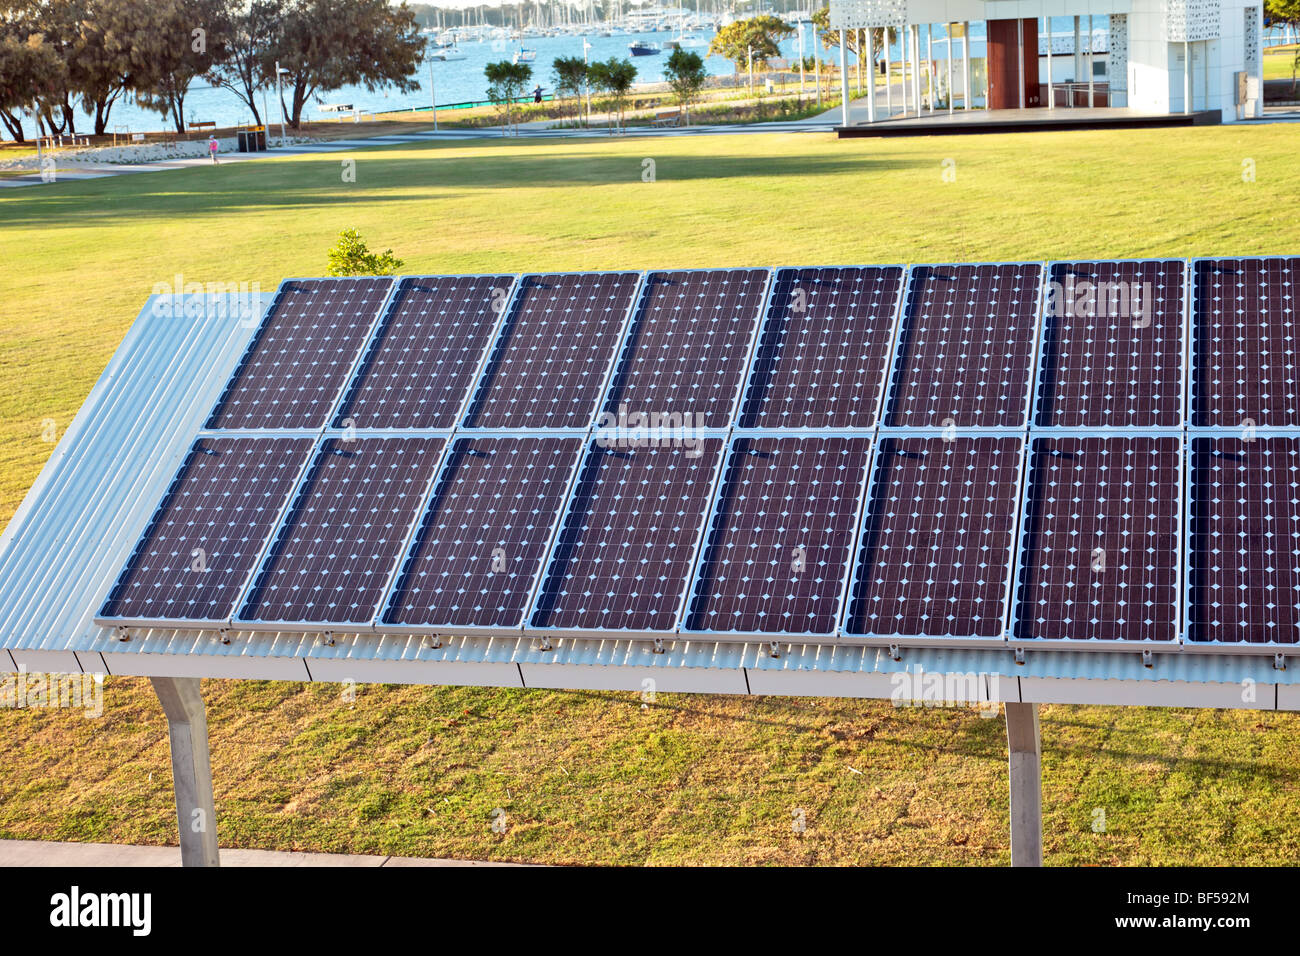 Solar panels provide all required electricity for new community park Southport Broadwalk Queensland Australia Stock Photo